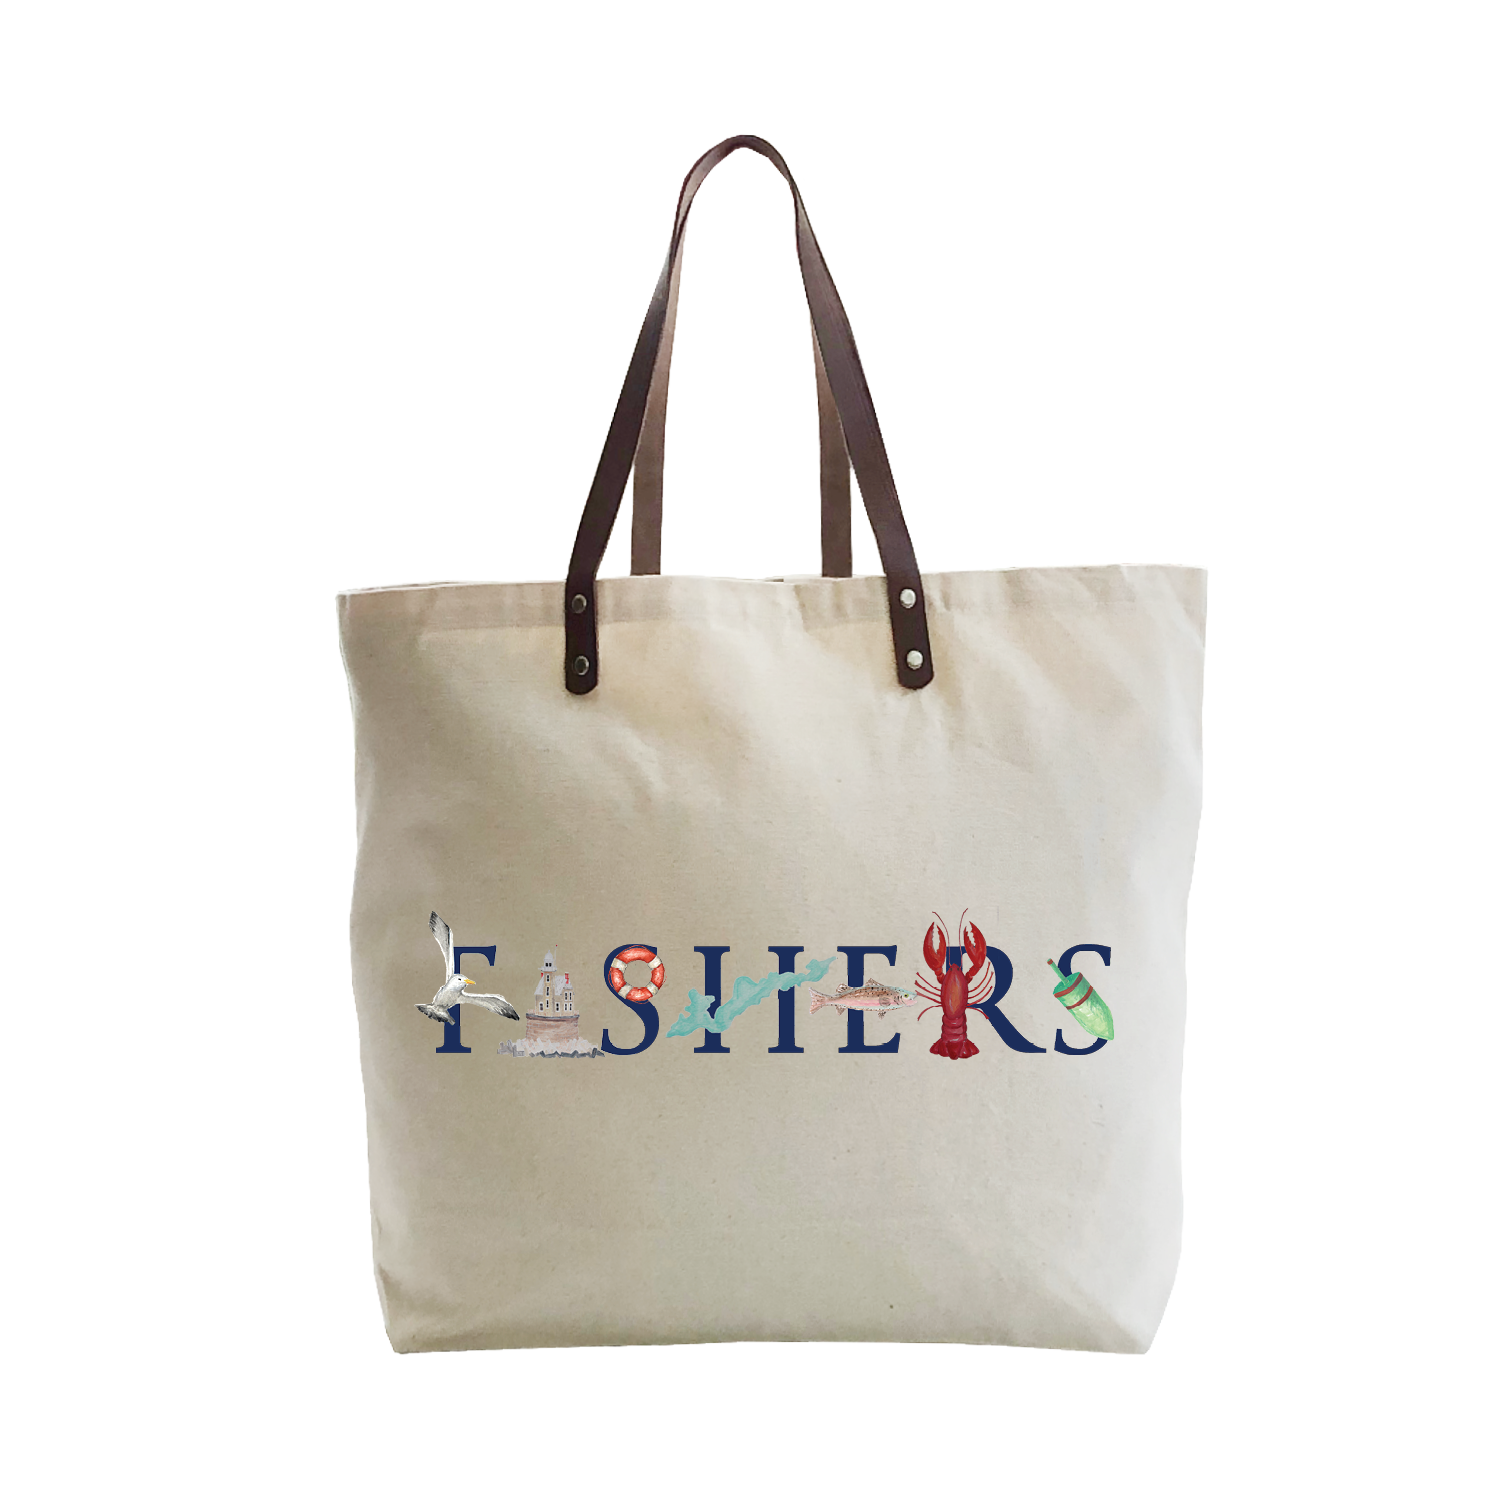 fishers large tote